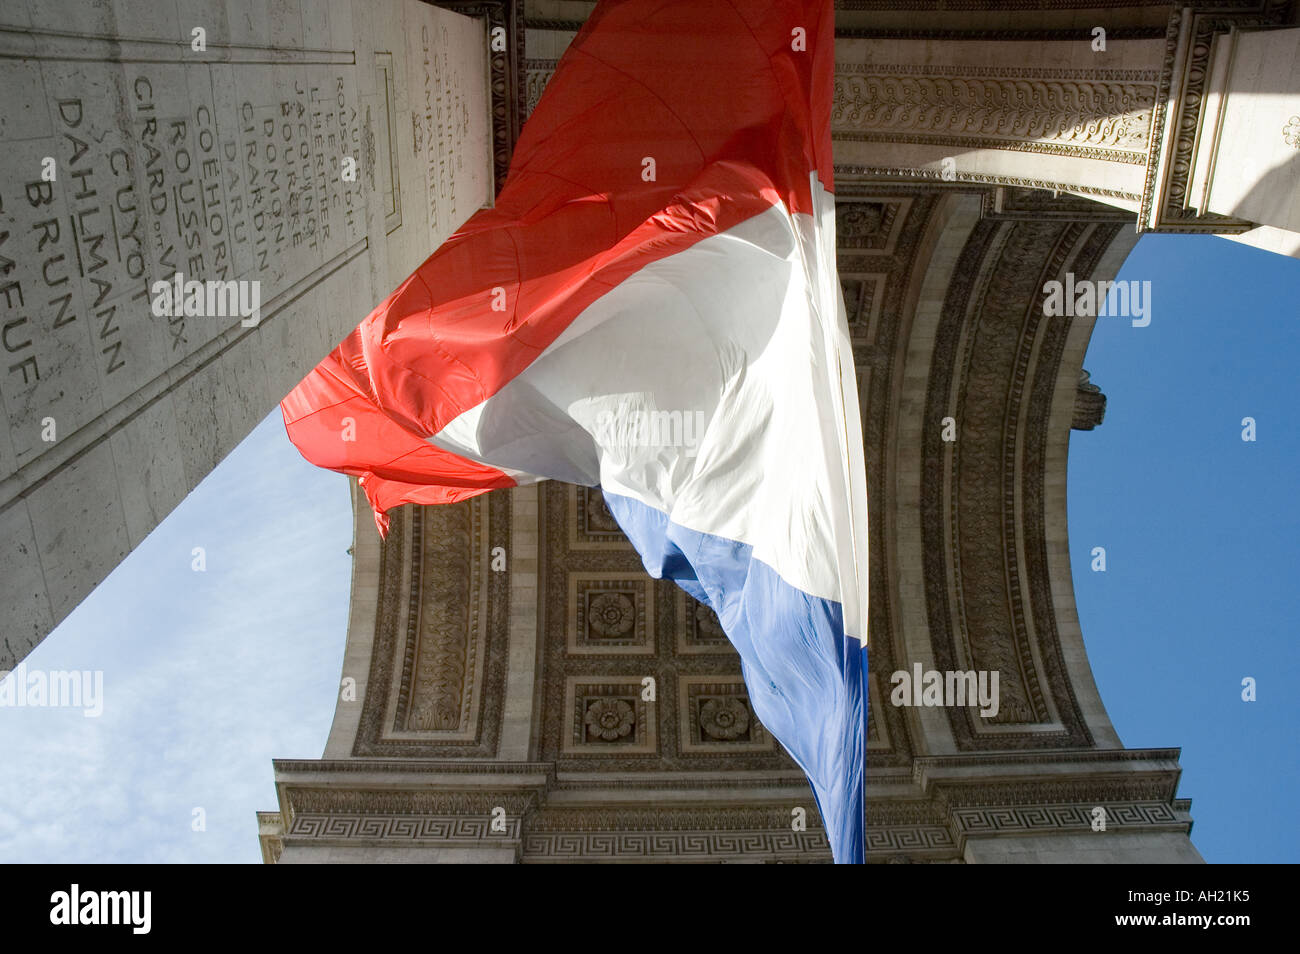 Looking up at the French tricolor under the arc de triomphe in paris france Stock Photo